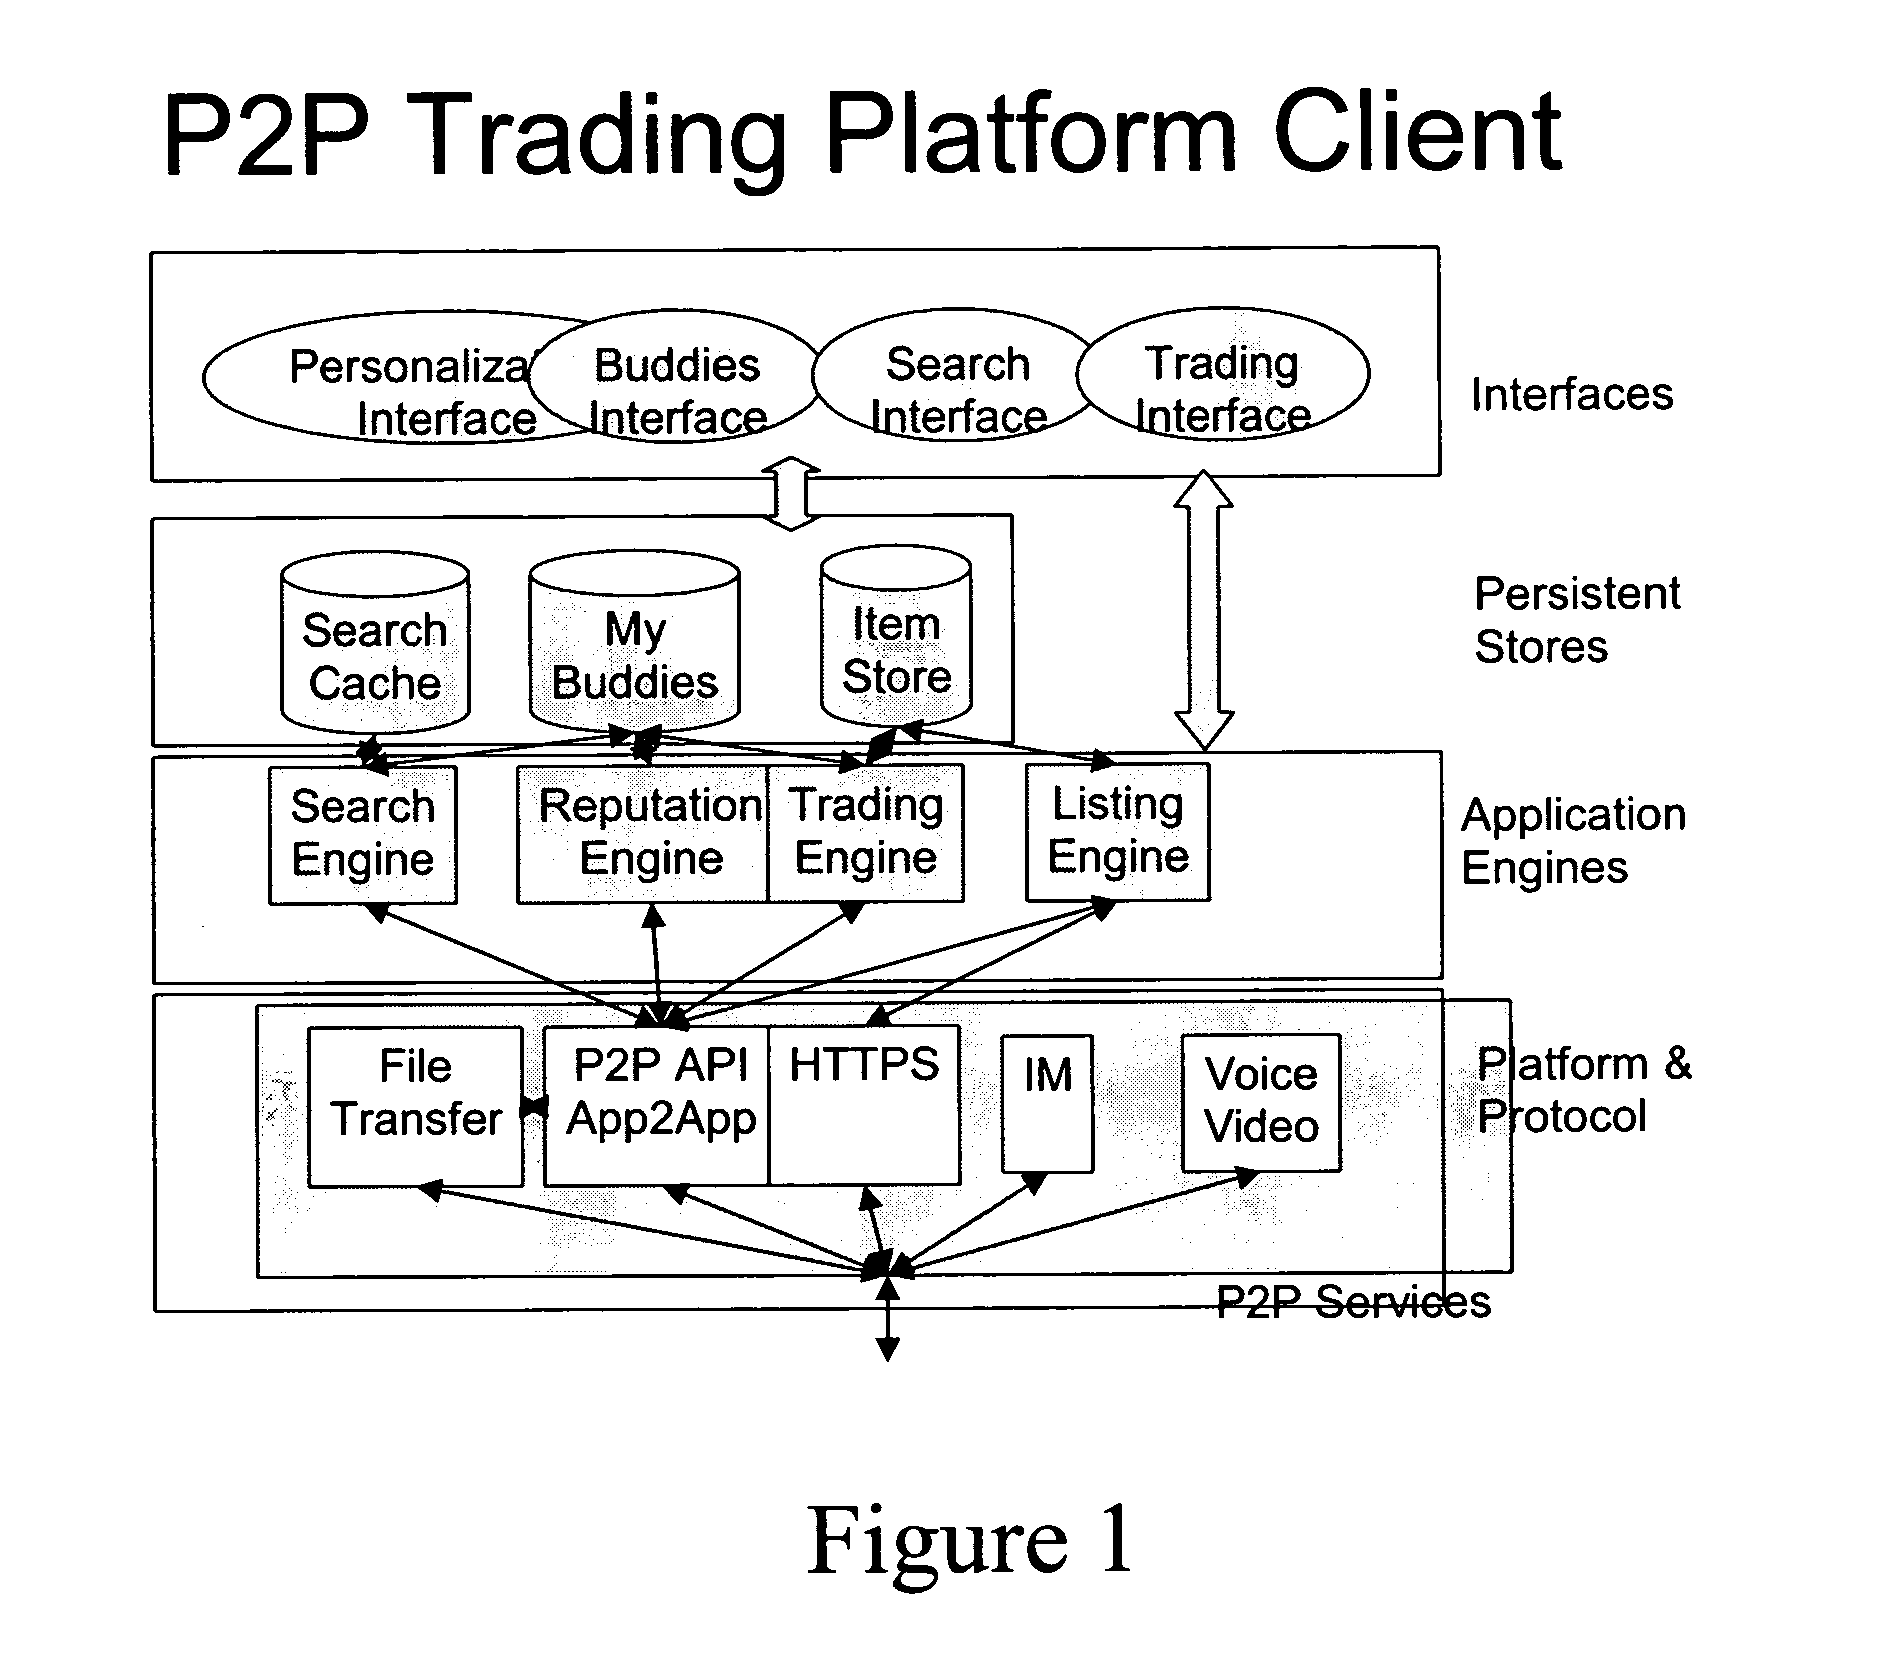 Peer-to-peer trading platform with roles-based transactions